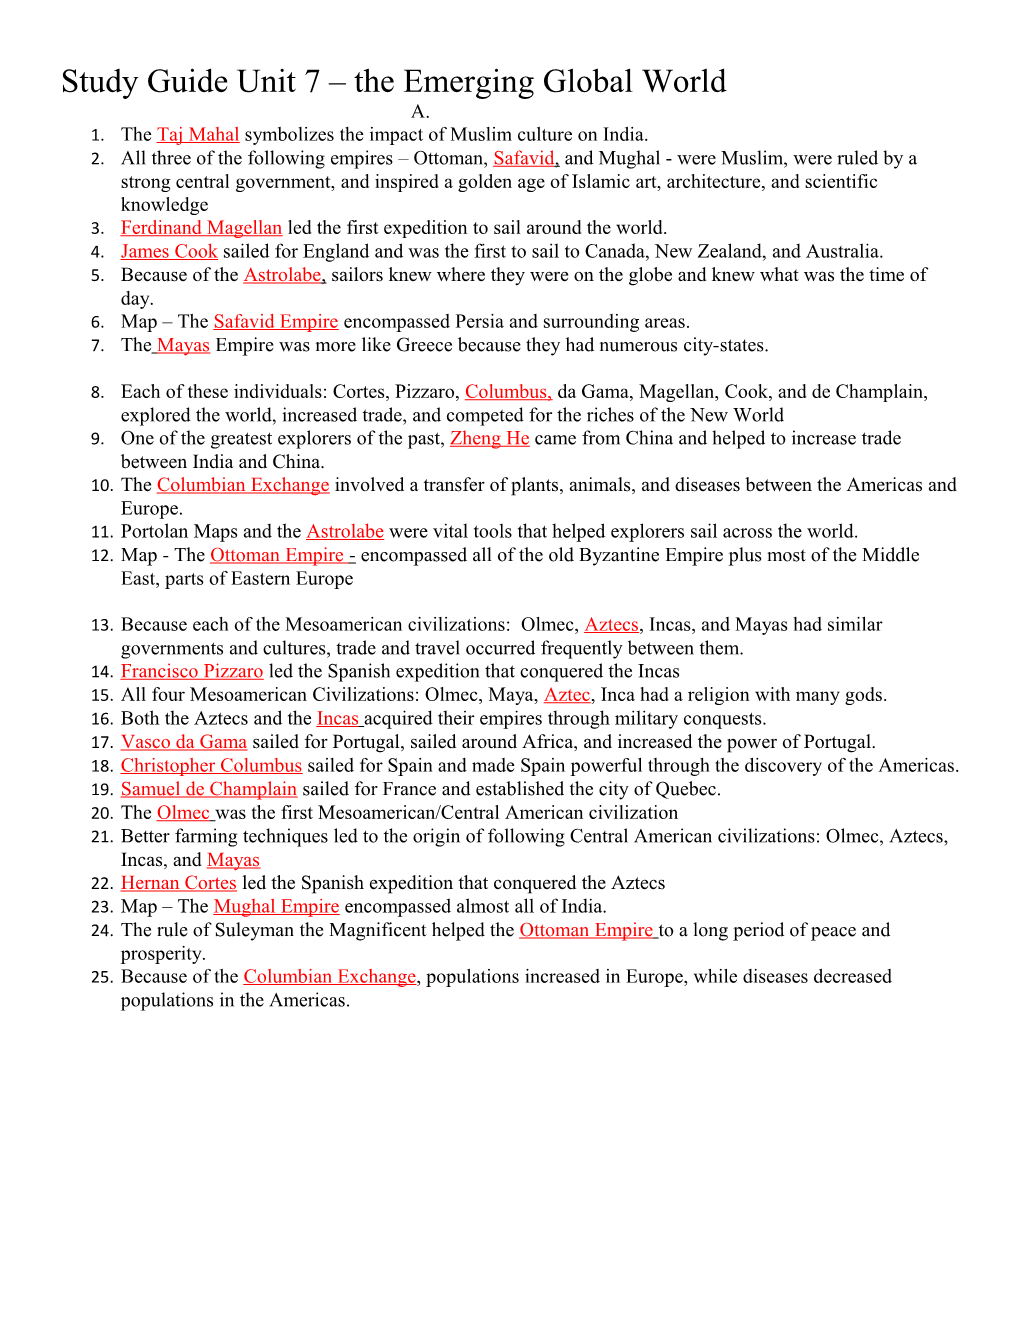 Study Guide Unit 7 the Emerging Global World